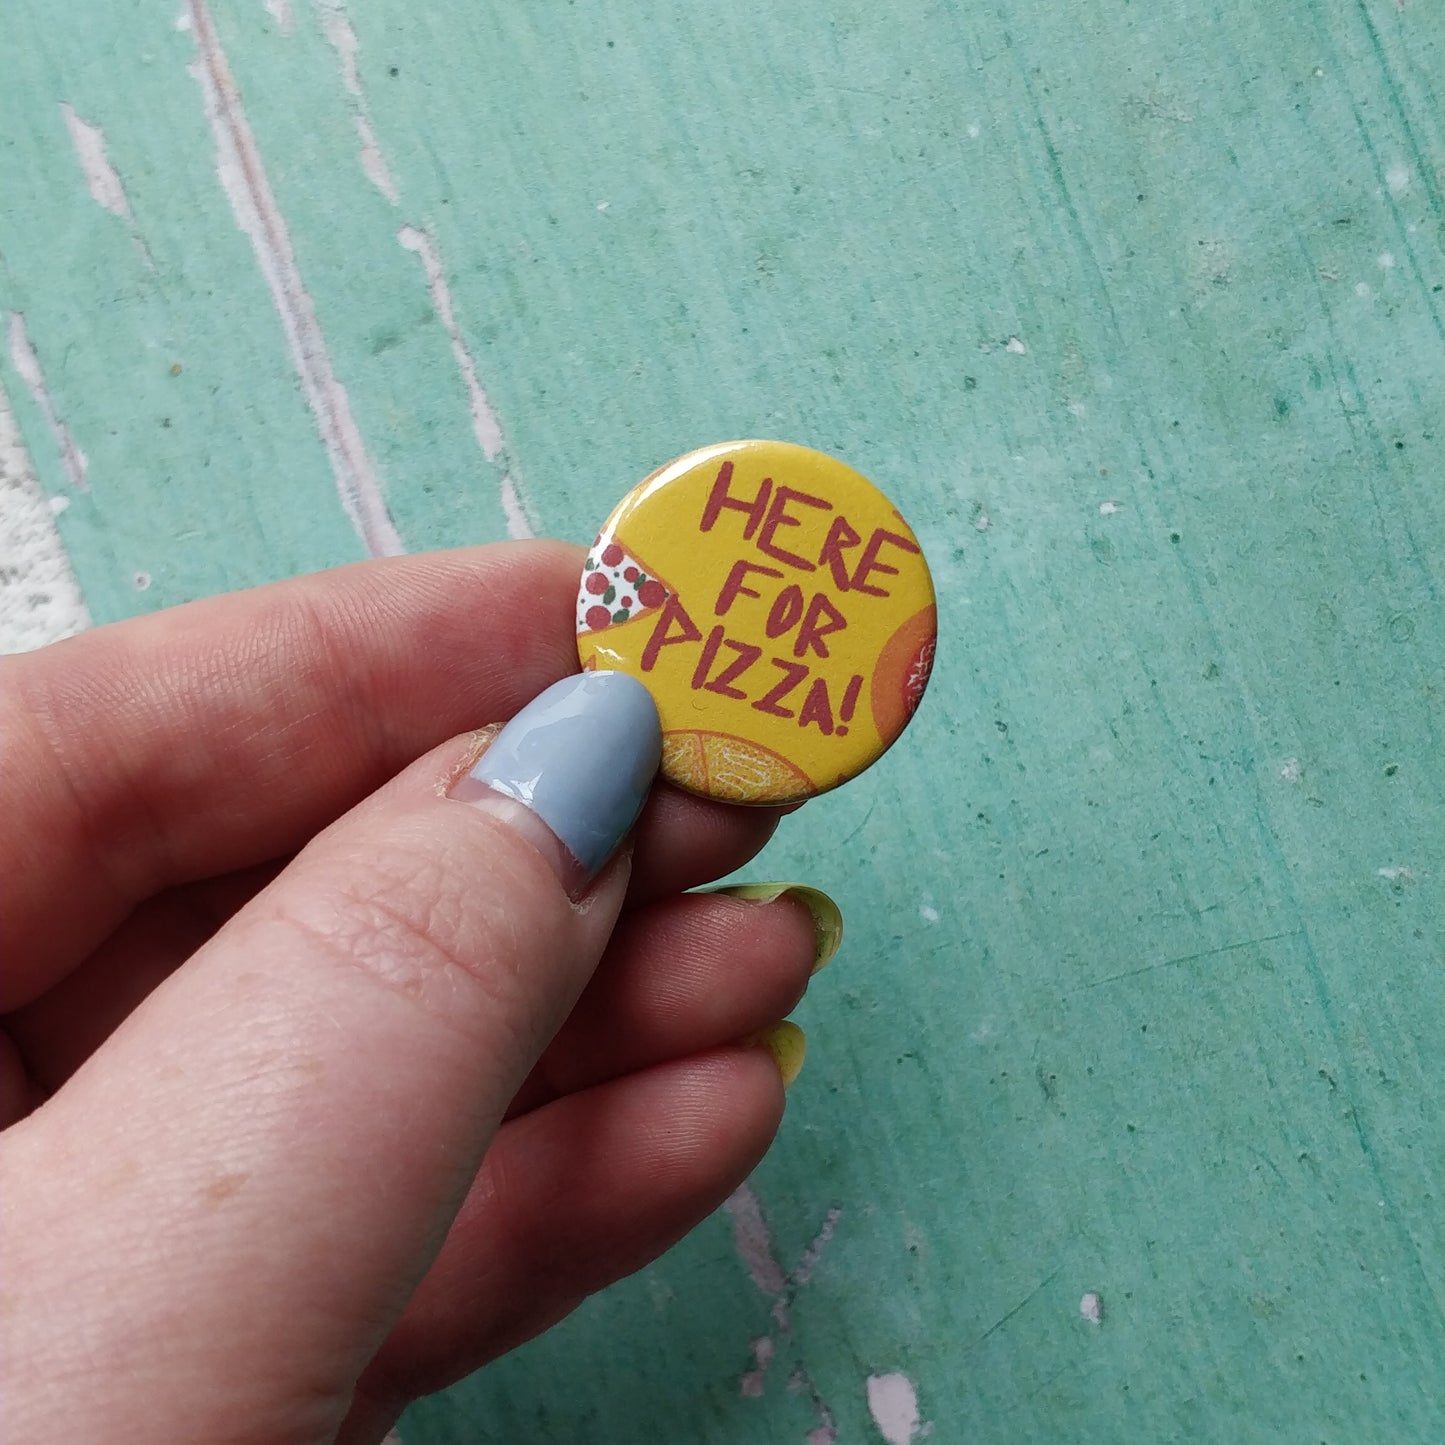 Here for Pizza Yellow Illustrated Badge/Mirror - fay-dixon-design